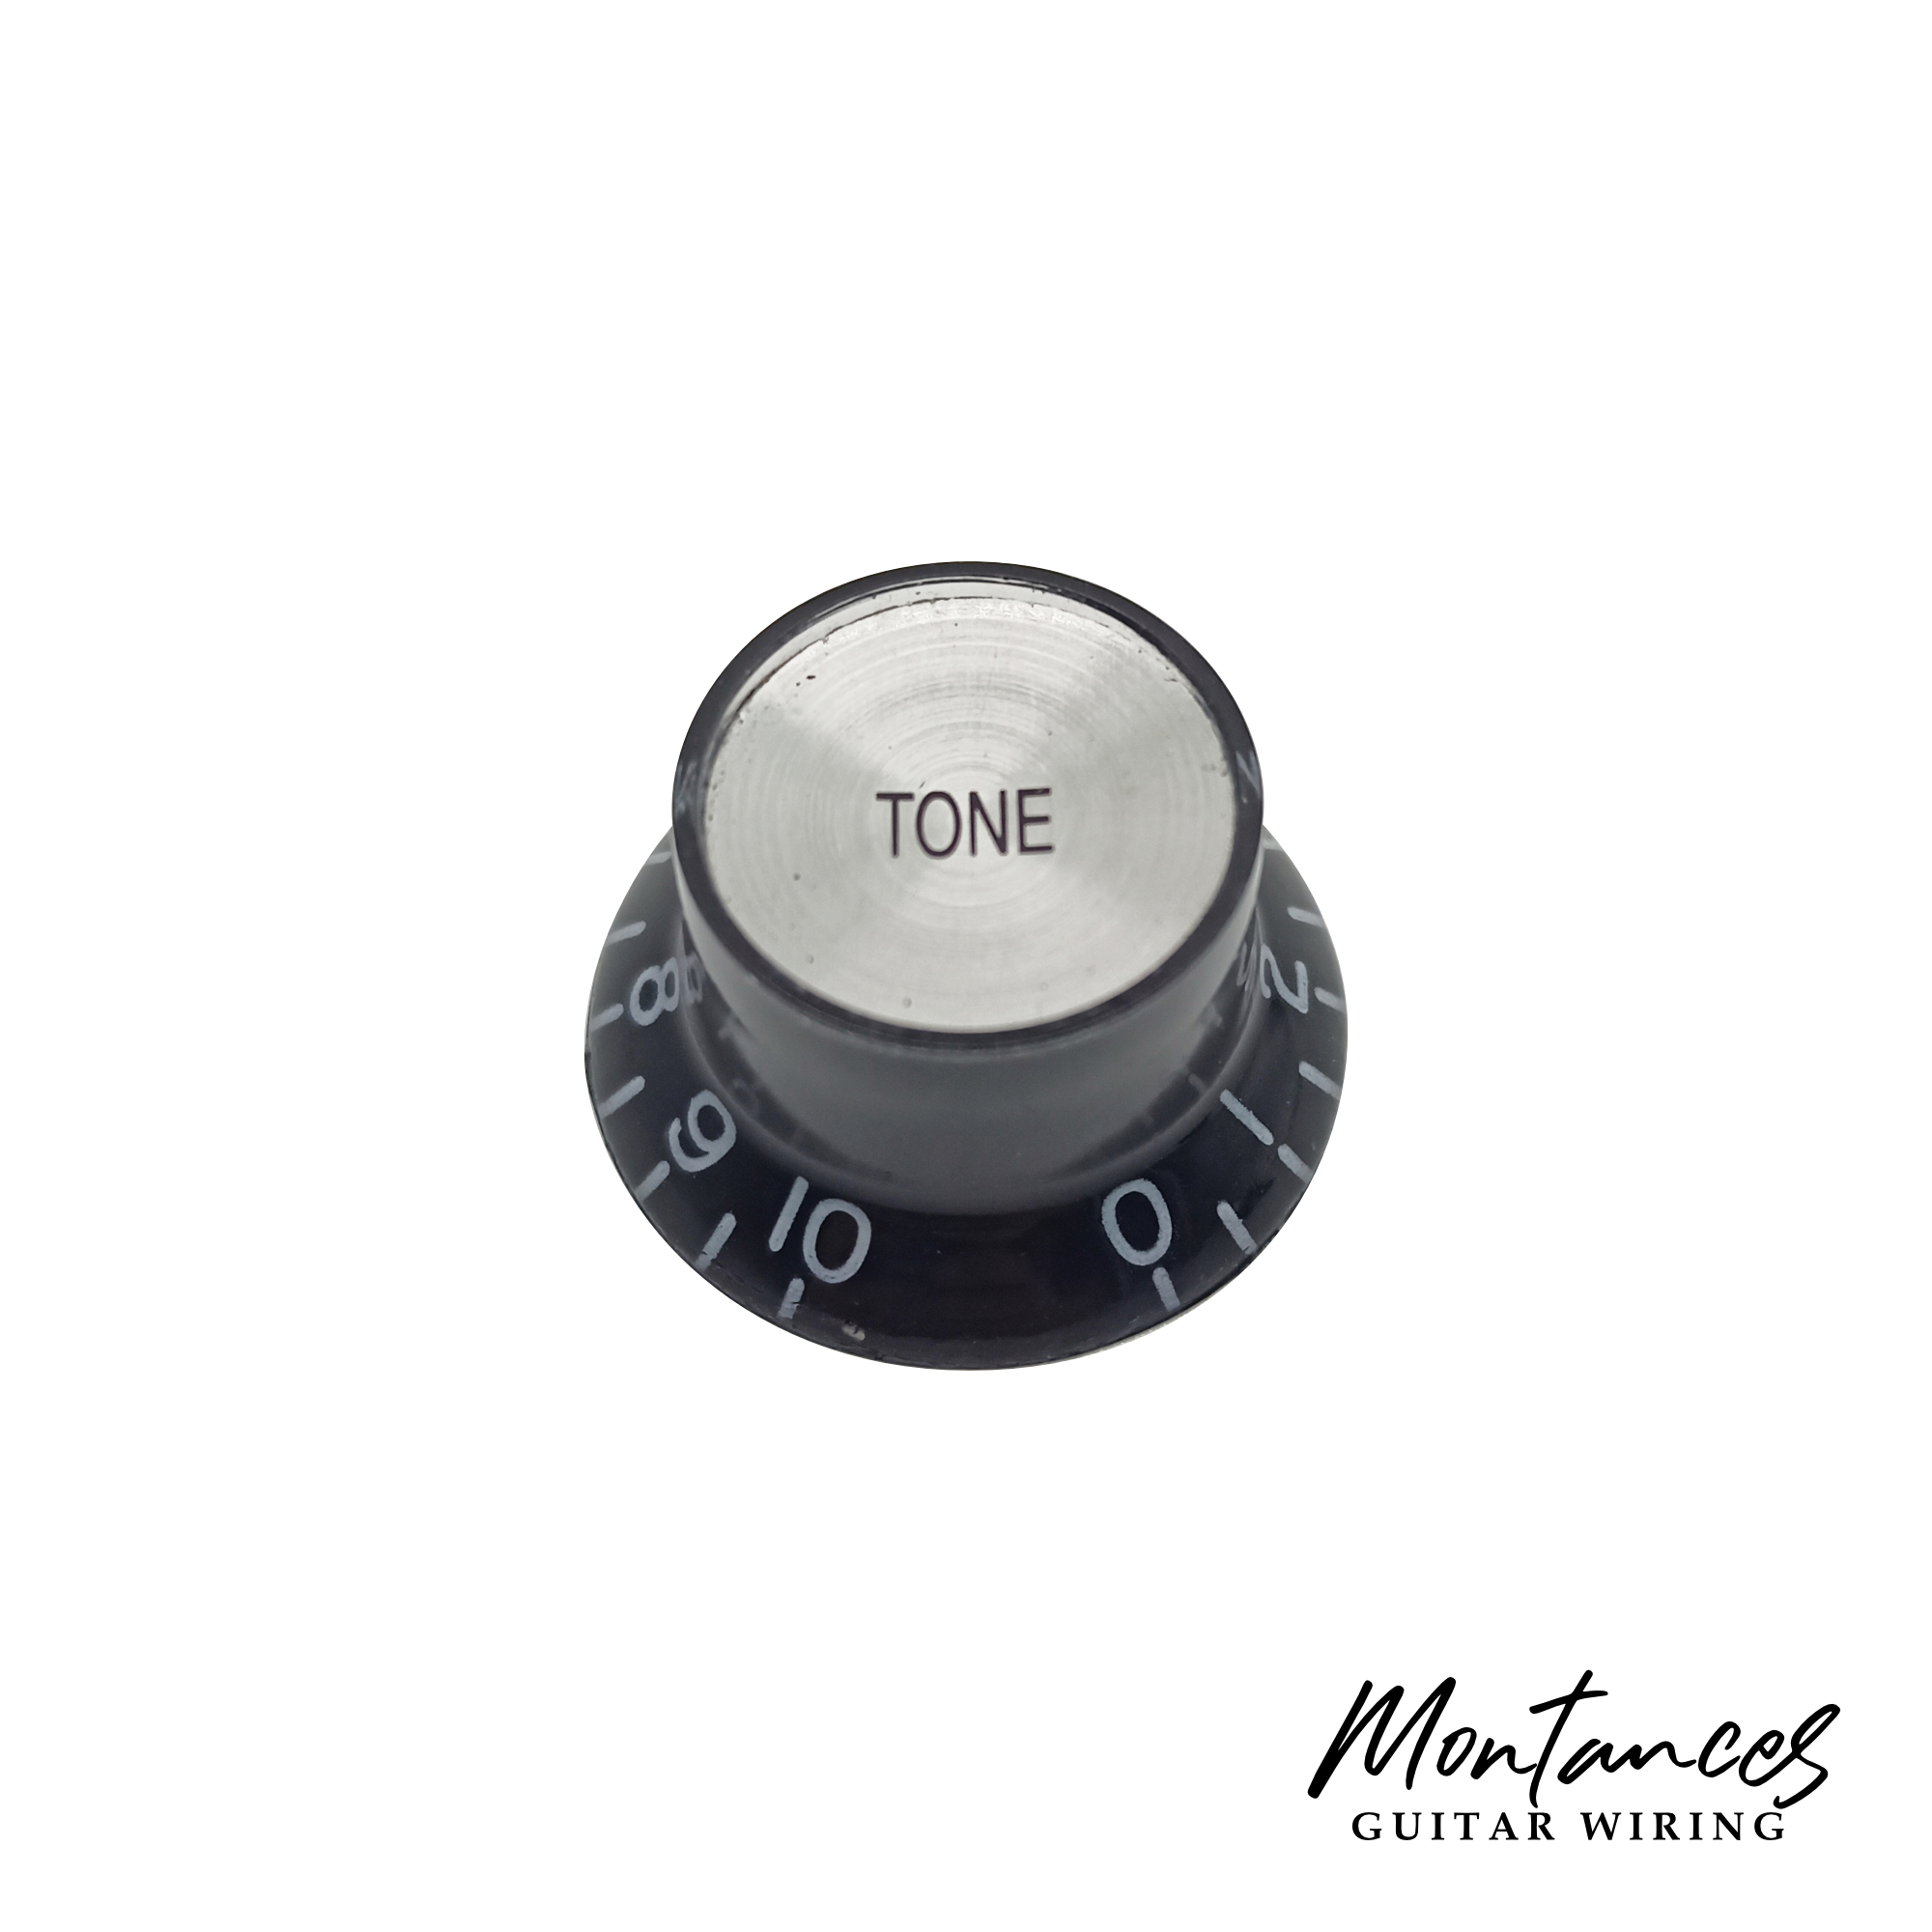 Top Hat Knob, Black With Silver Cap, Gibson Style, Push-On Metric, 18 Splines, Sold Per Piece